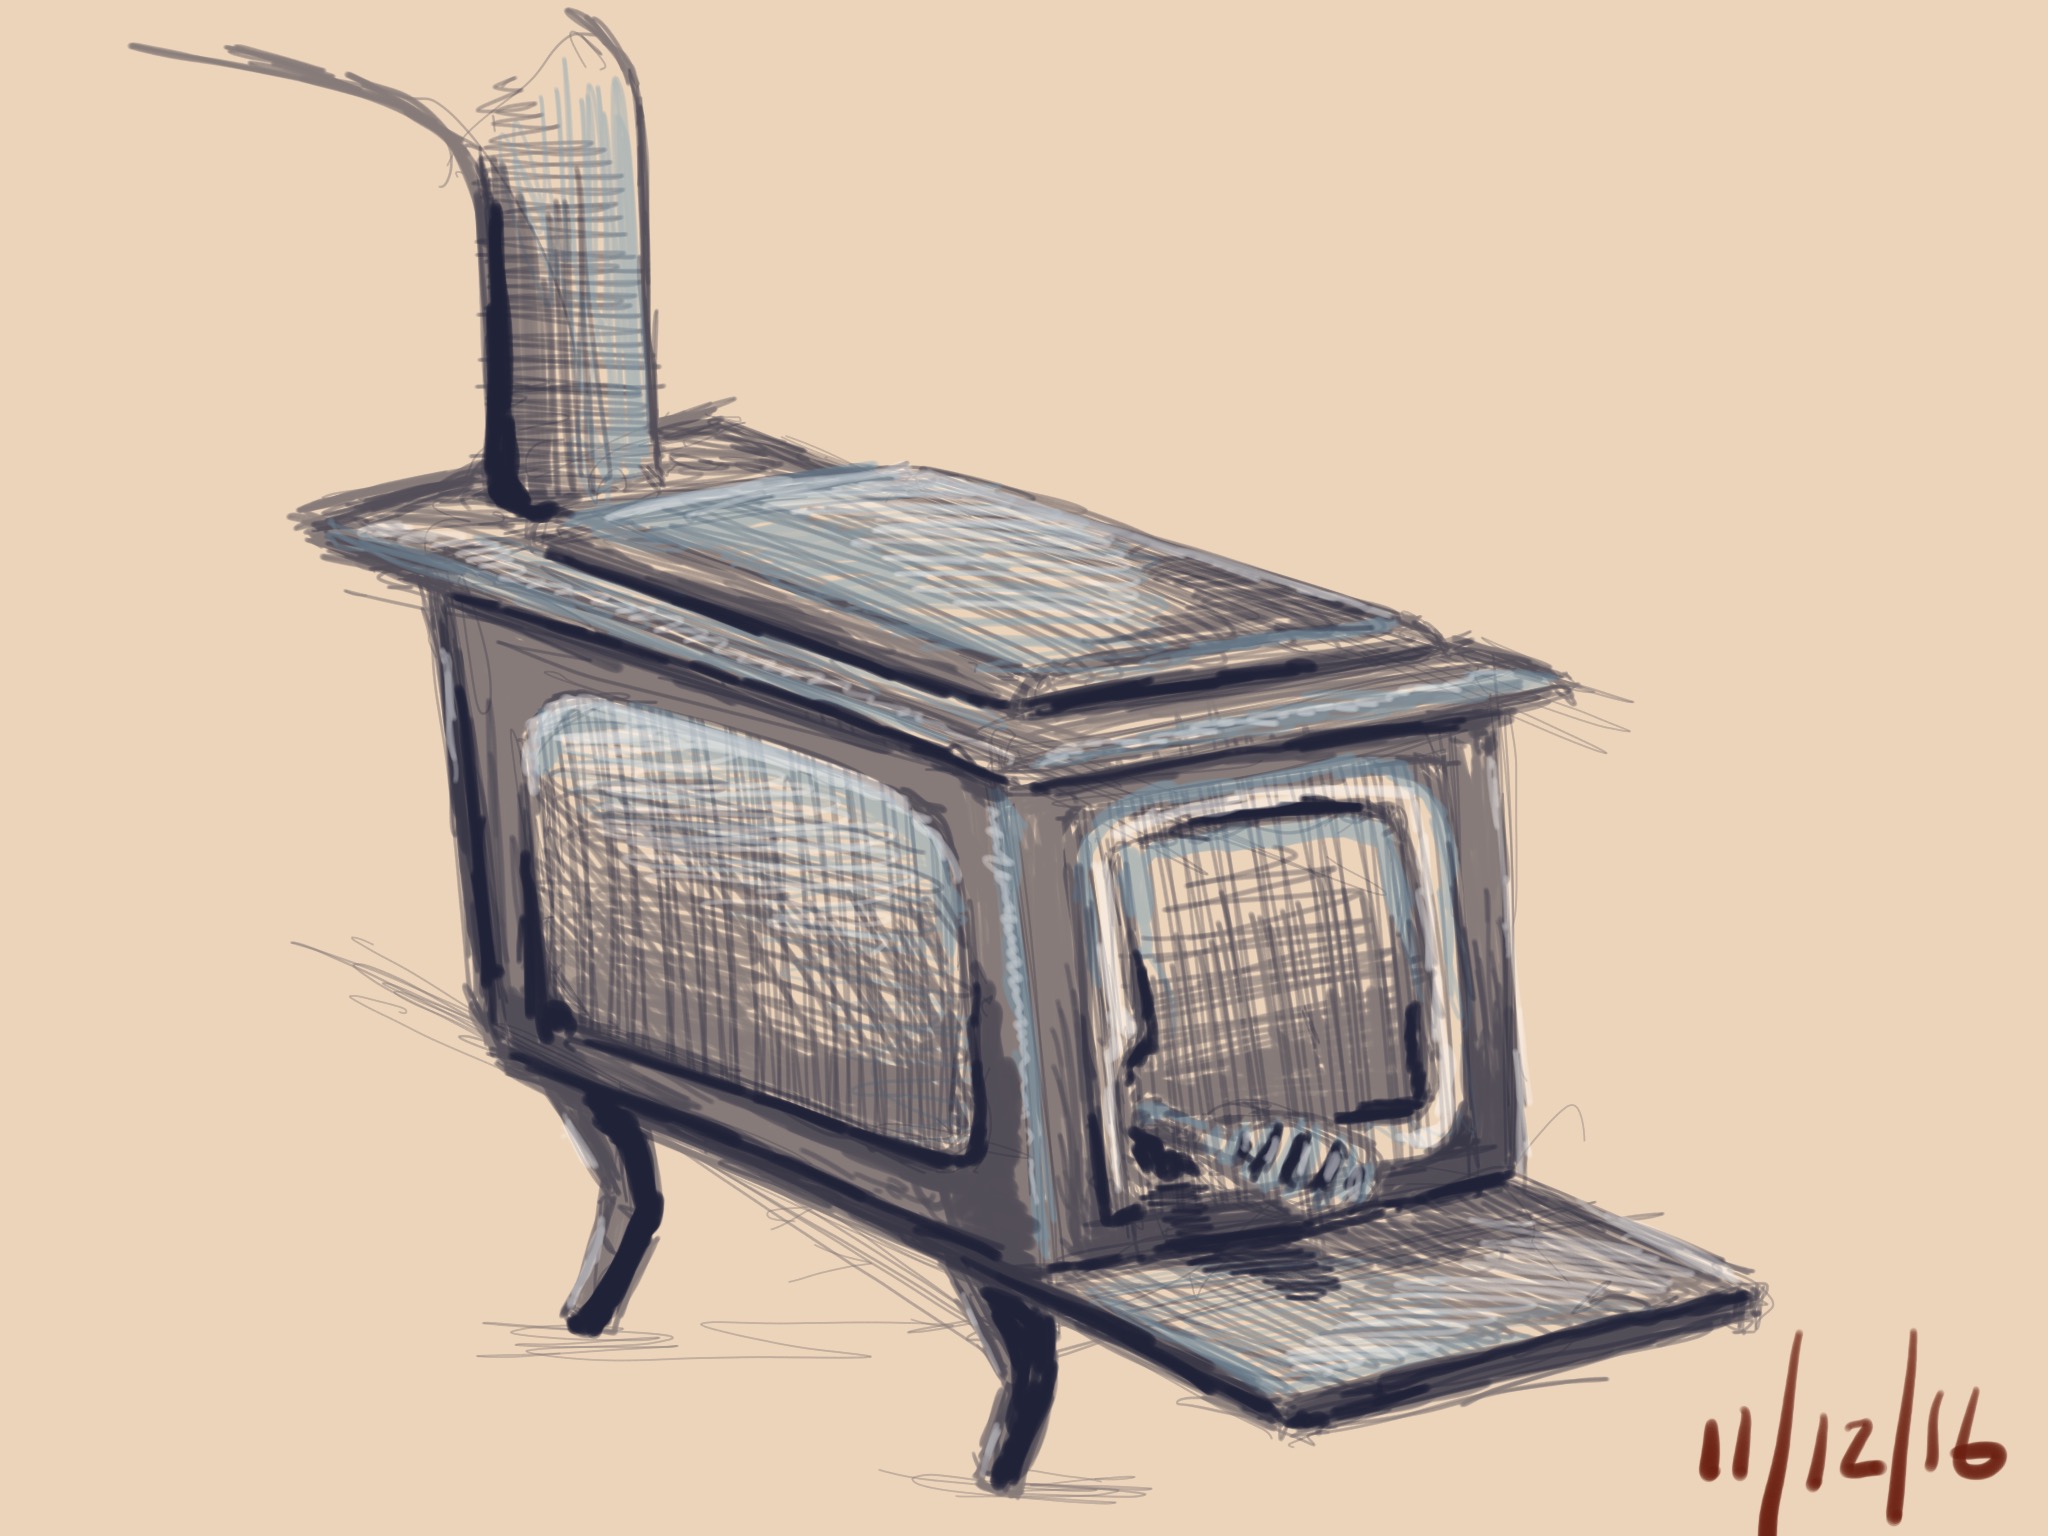 #gdpipeline daily challenge 11-12-16 "wood stove"